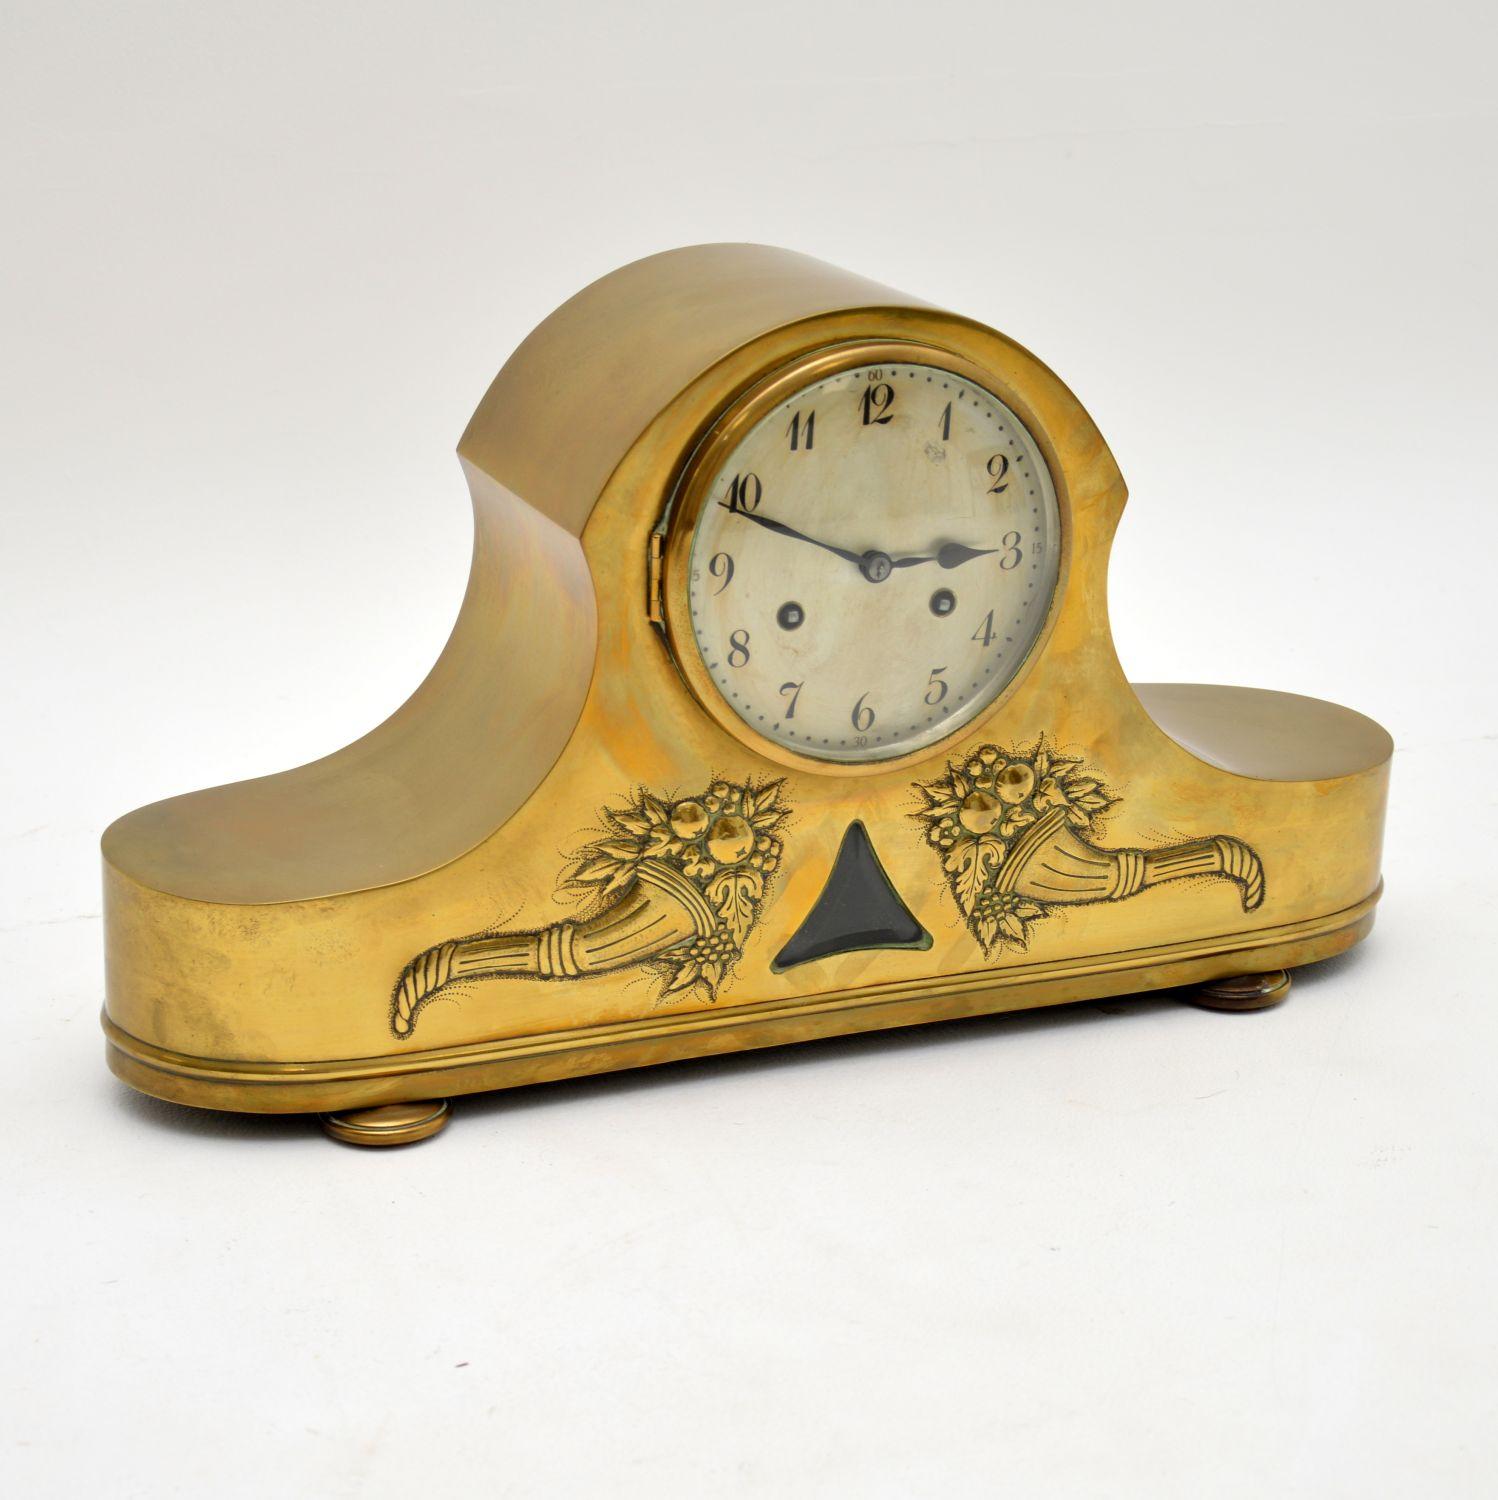 A stunning antique brass mantel clock, this was made in Germany and dates from circa 1900-1910 period. It was made by the renowned clock maker Junghans of Wurttenberg, the makers mark is seen stamped inside.

This model is known as a Napoleon hat